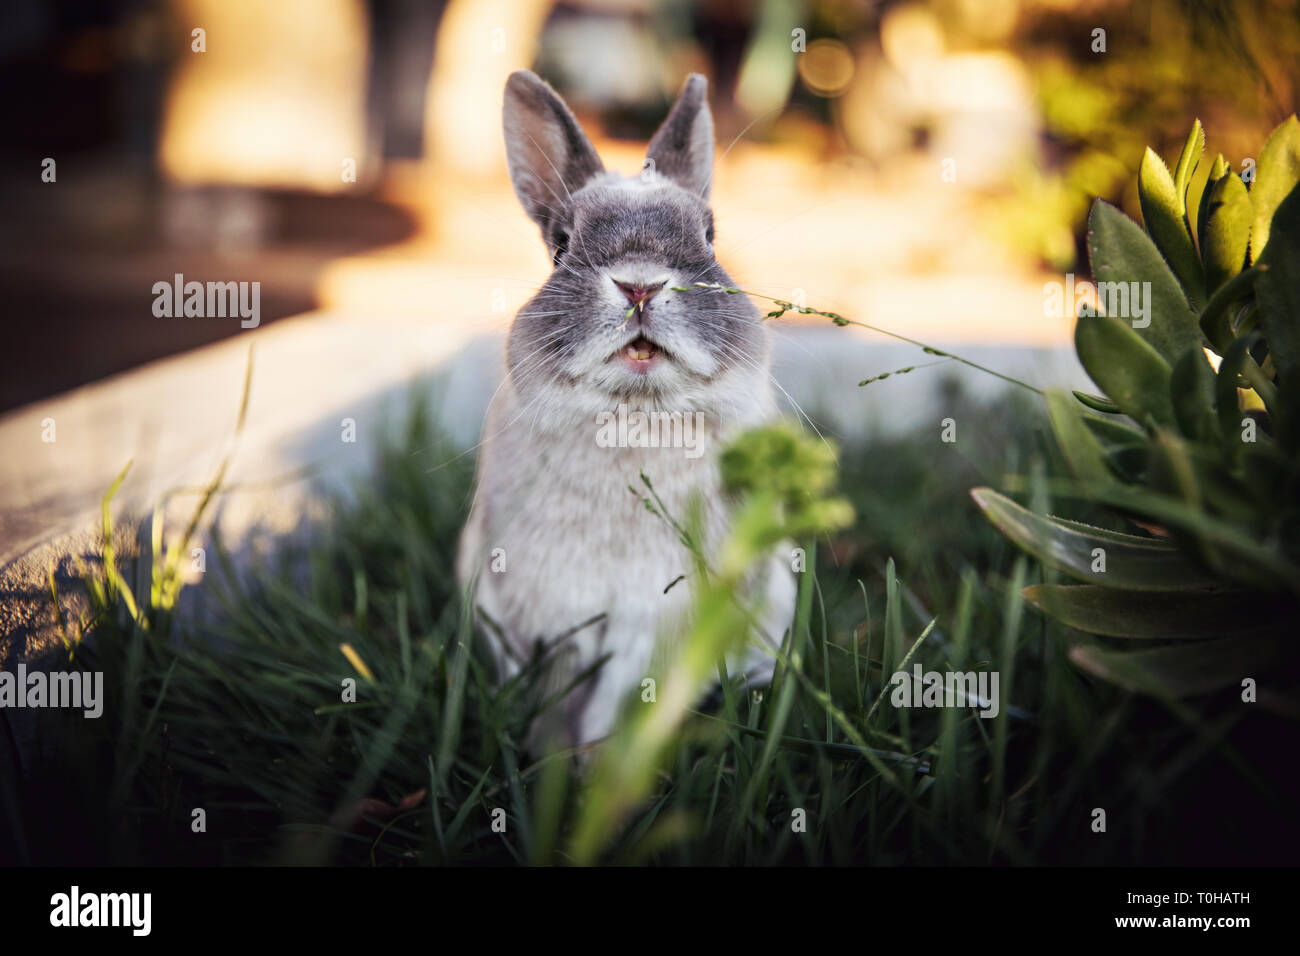 An expressive  portrait of a dwarf bunny with his mouth agape in a grassy outdoor area. Stock Photo